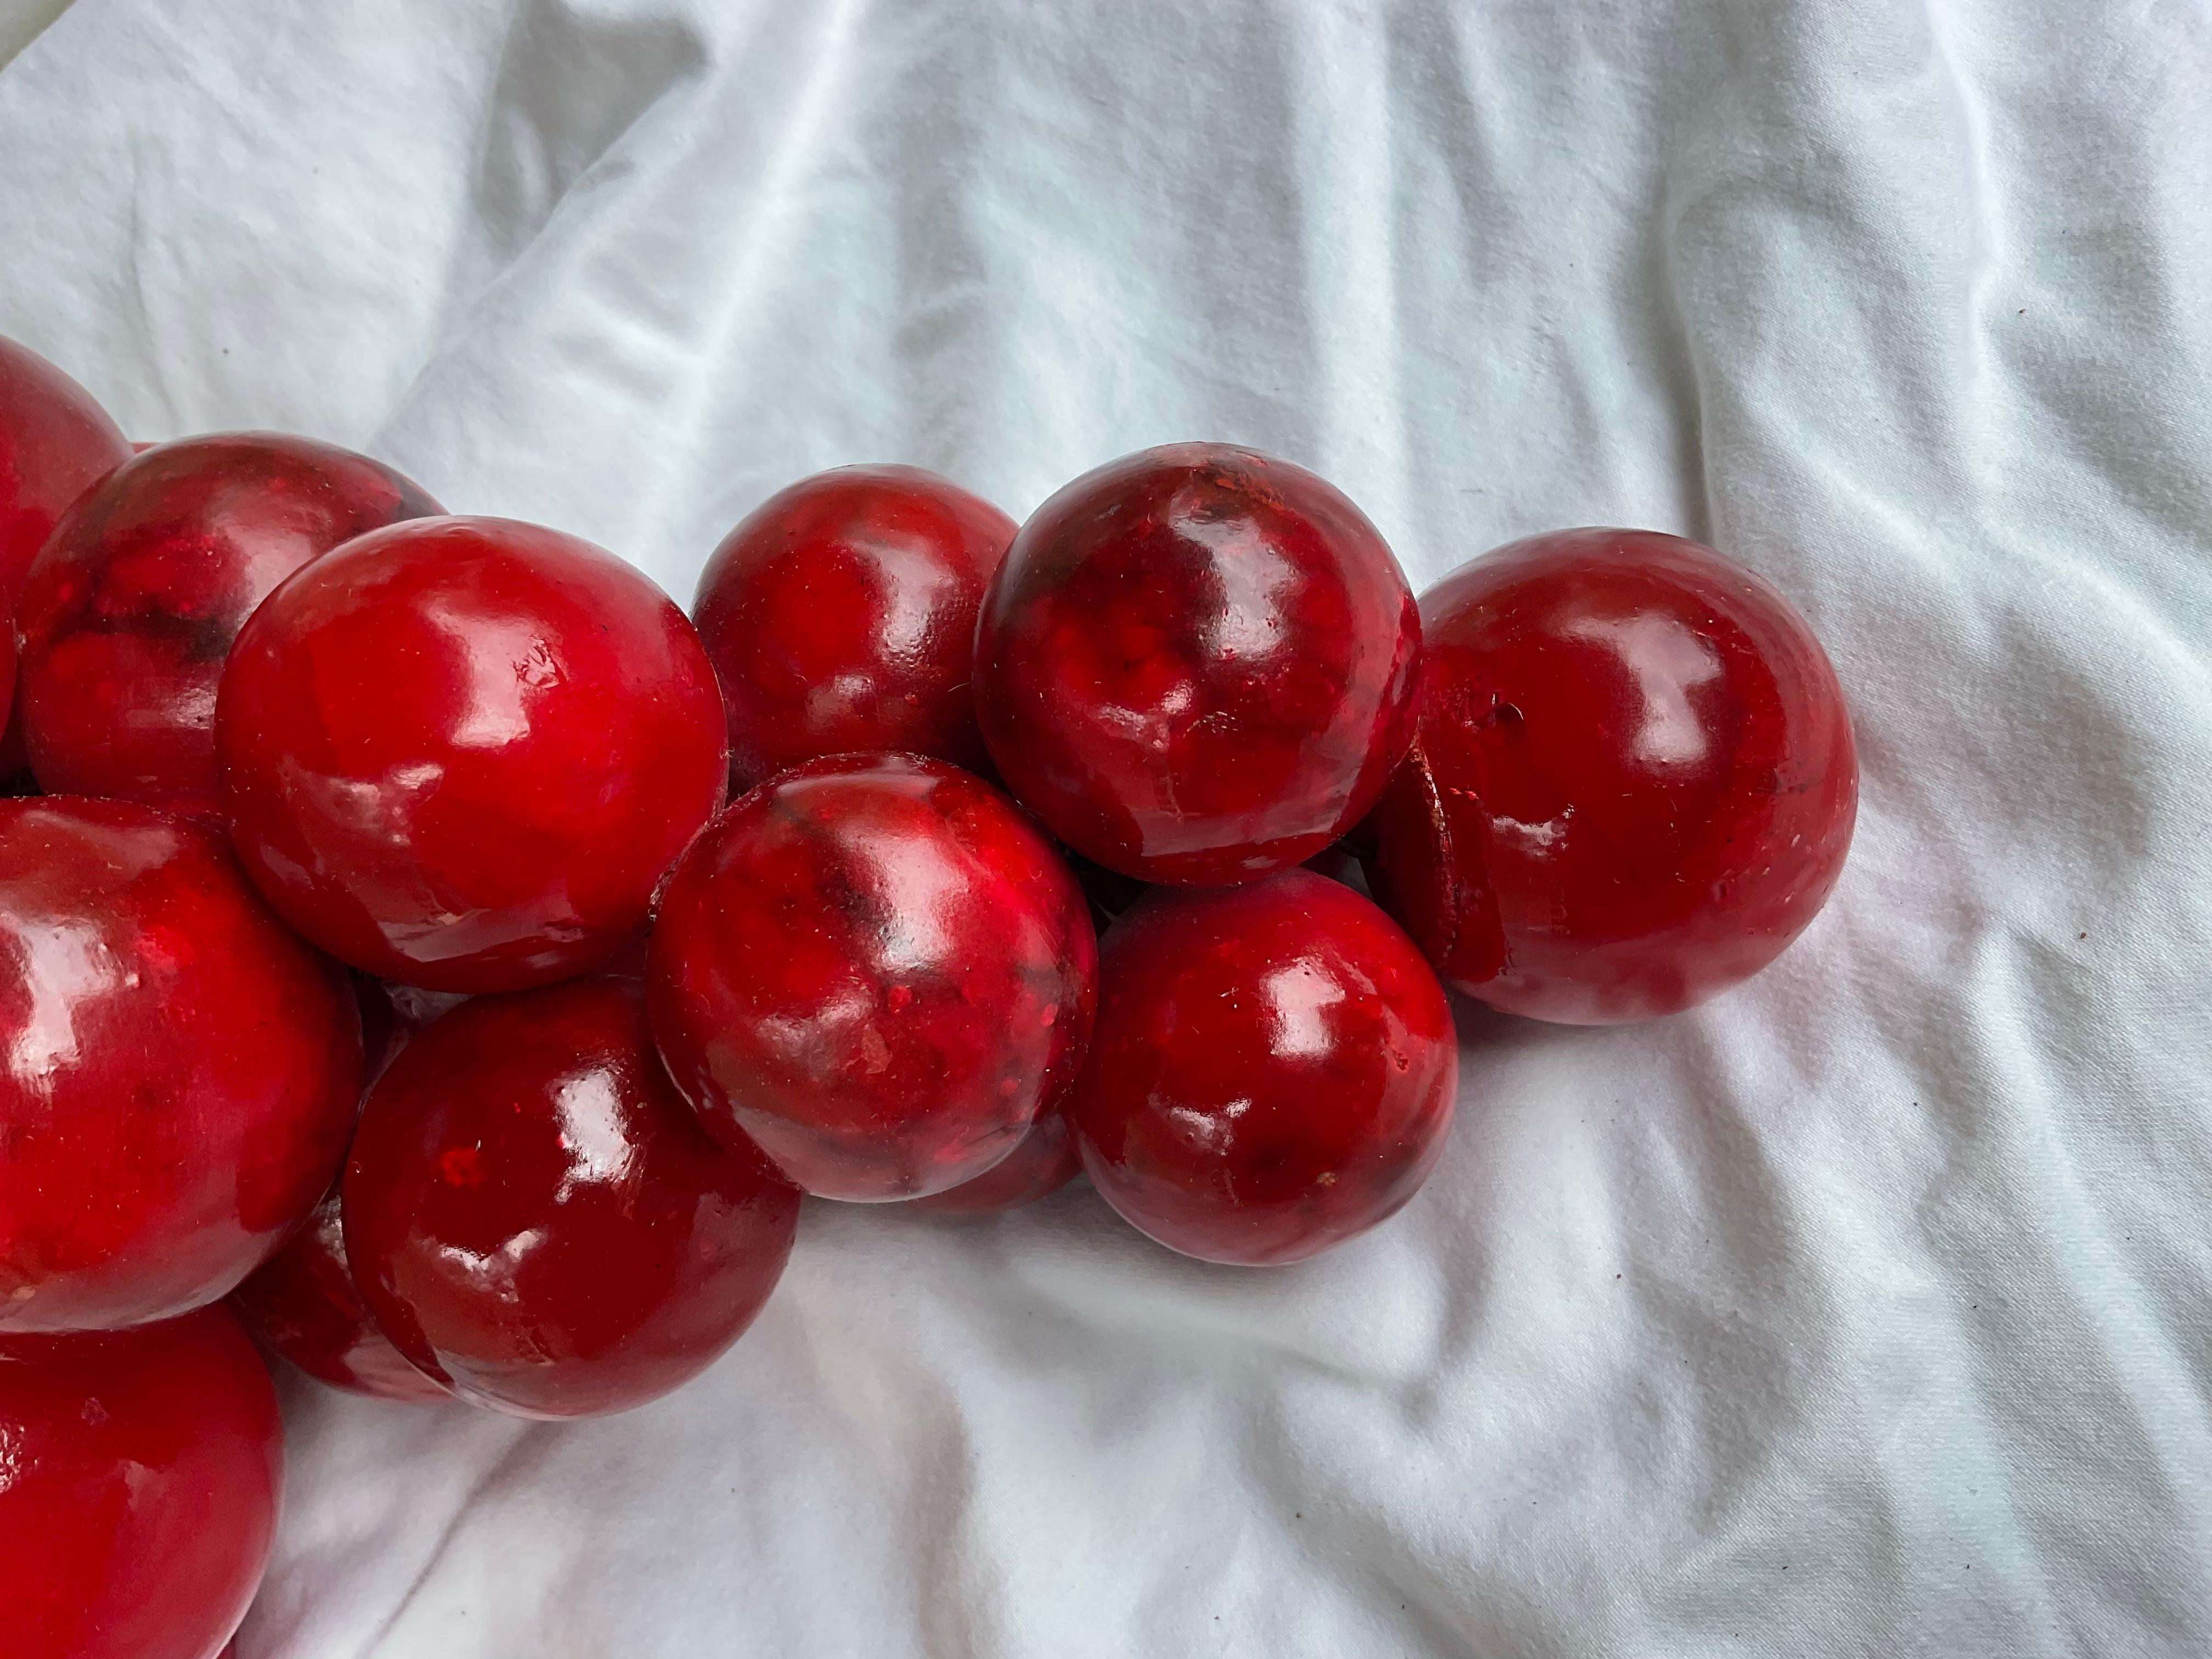 Alabaster 1970s Oversized Italian Stone Grapes in Red